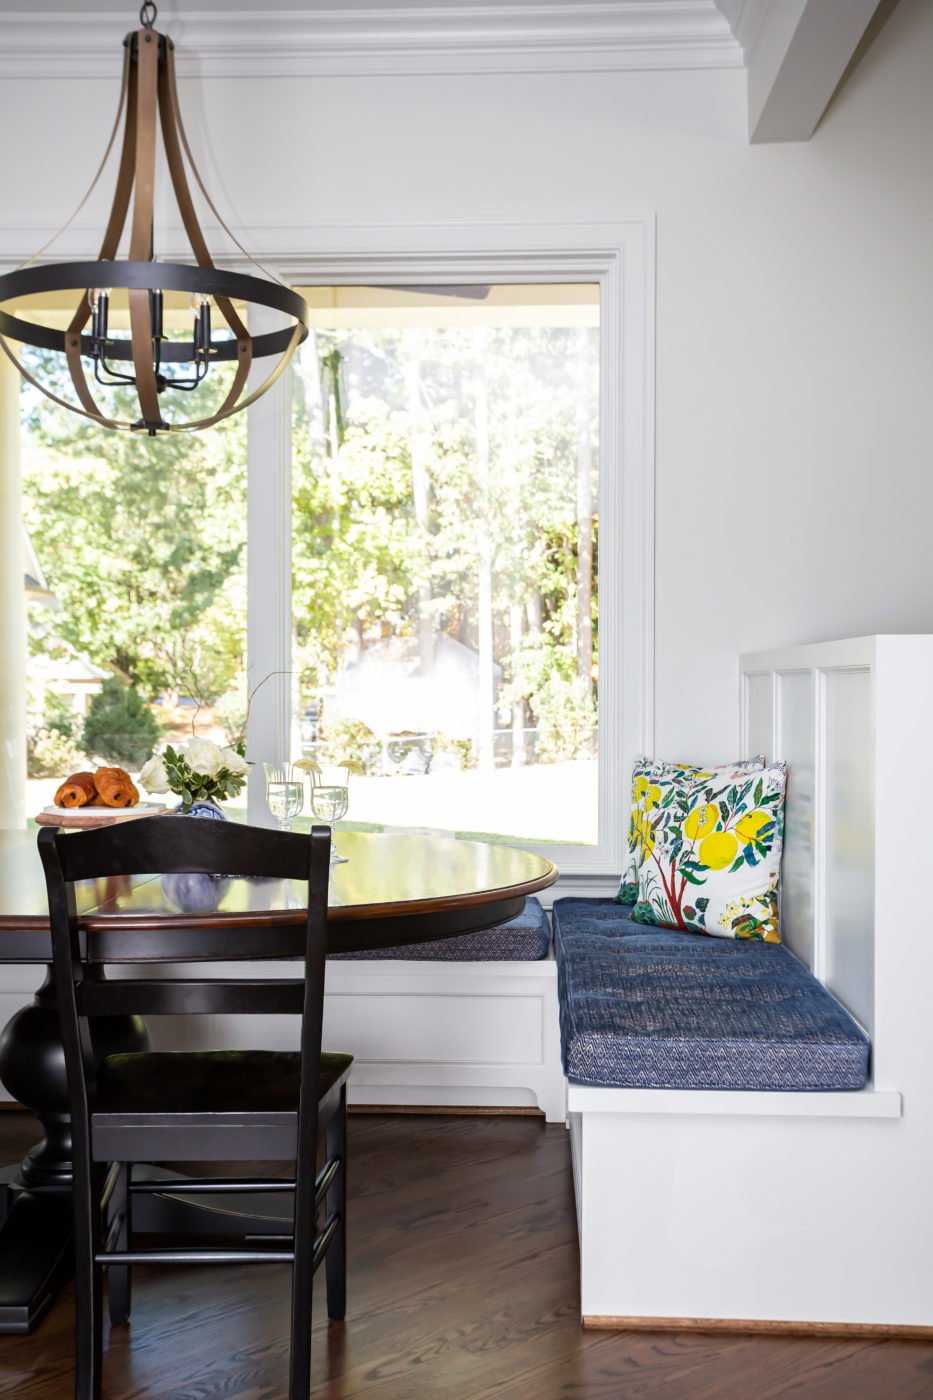 A new breakfast nook in a custom luxury home inside the beltline of Raleigh, NC